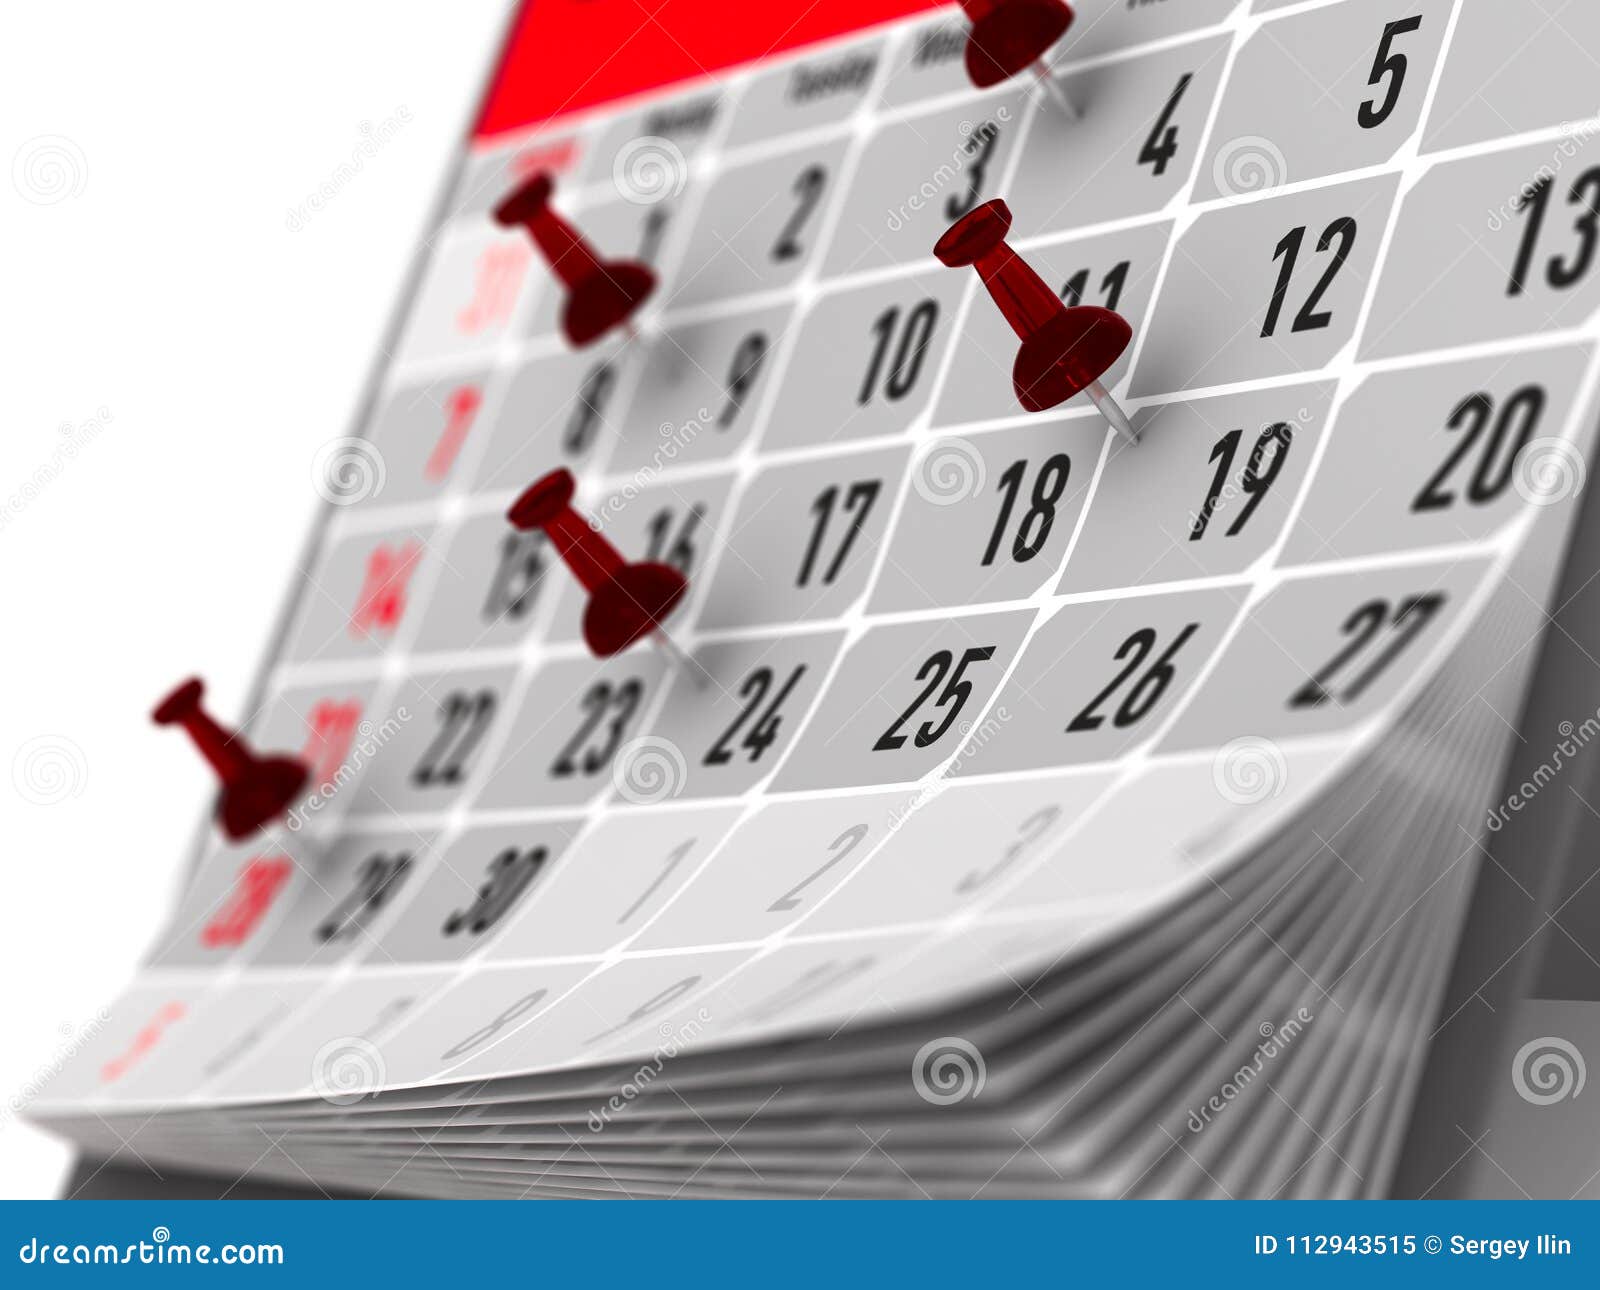 Red Pin Marking Important Day On Calendar 3d Illustration Stock